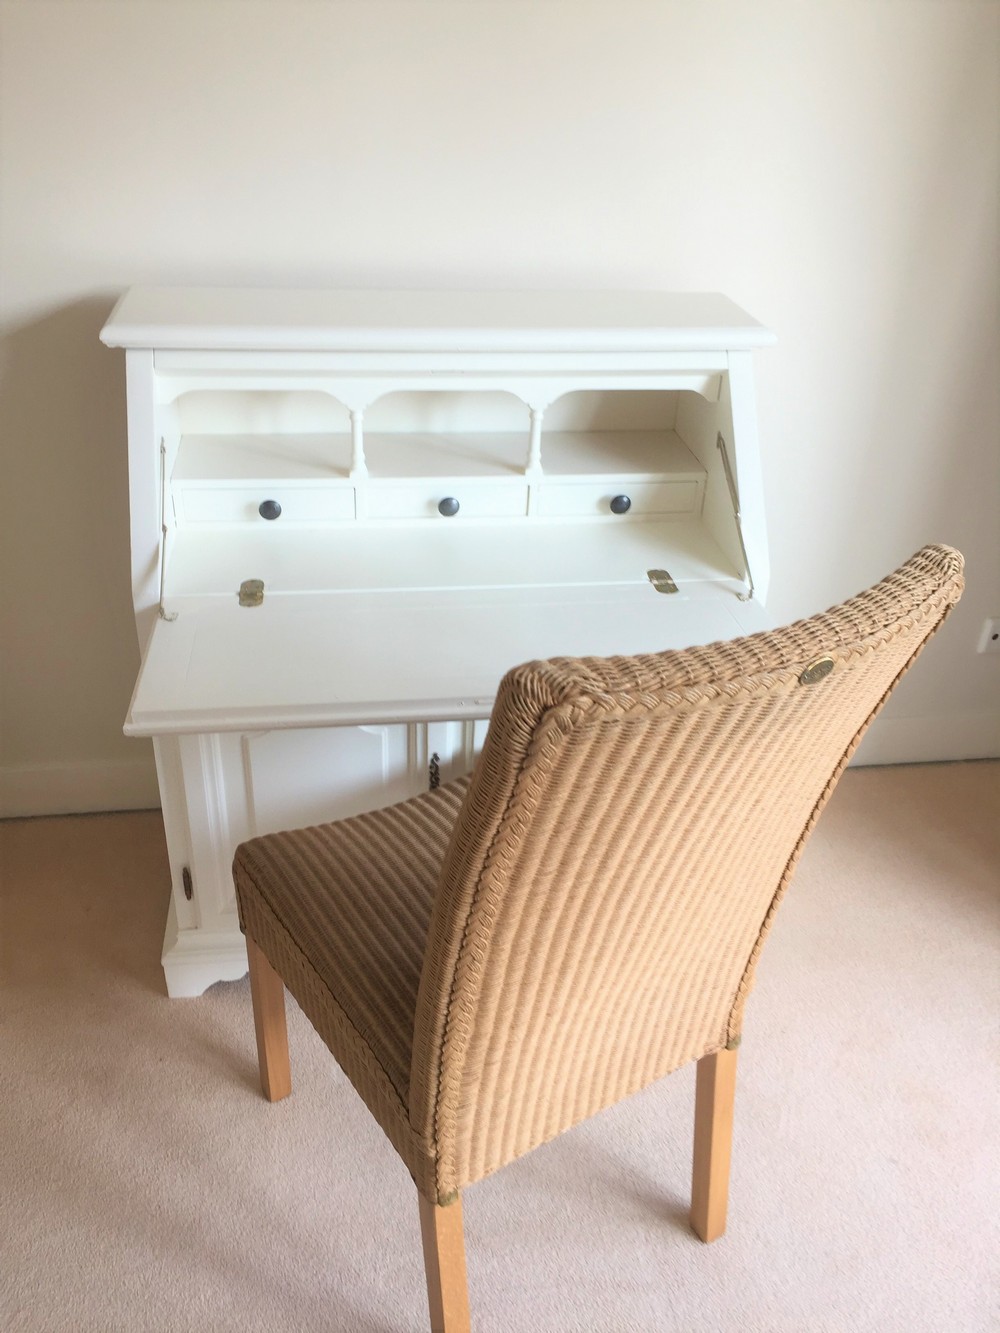 Awesome secretaire with comfortable chair